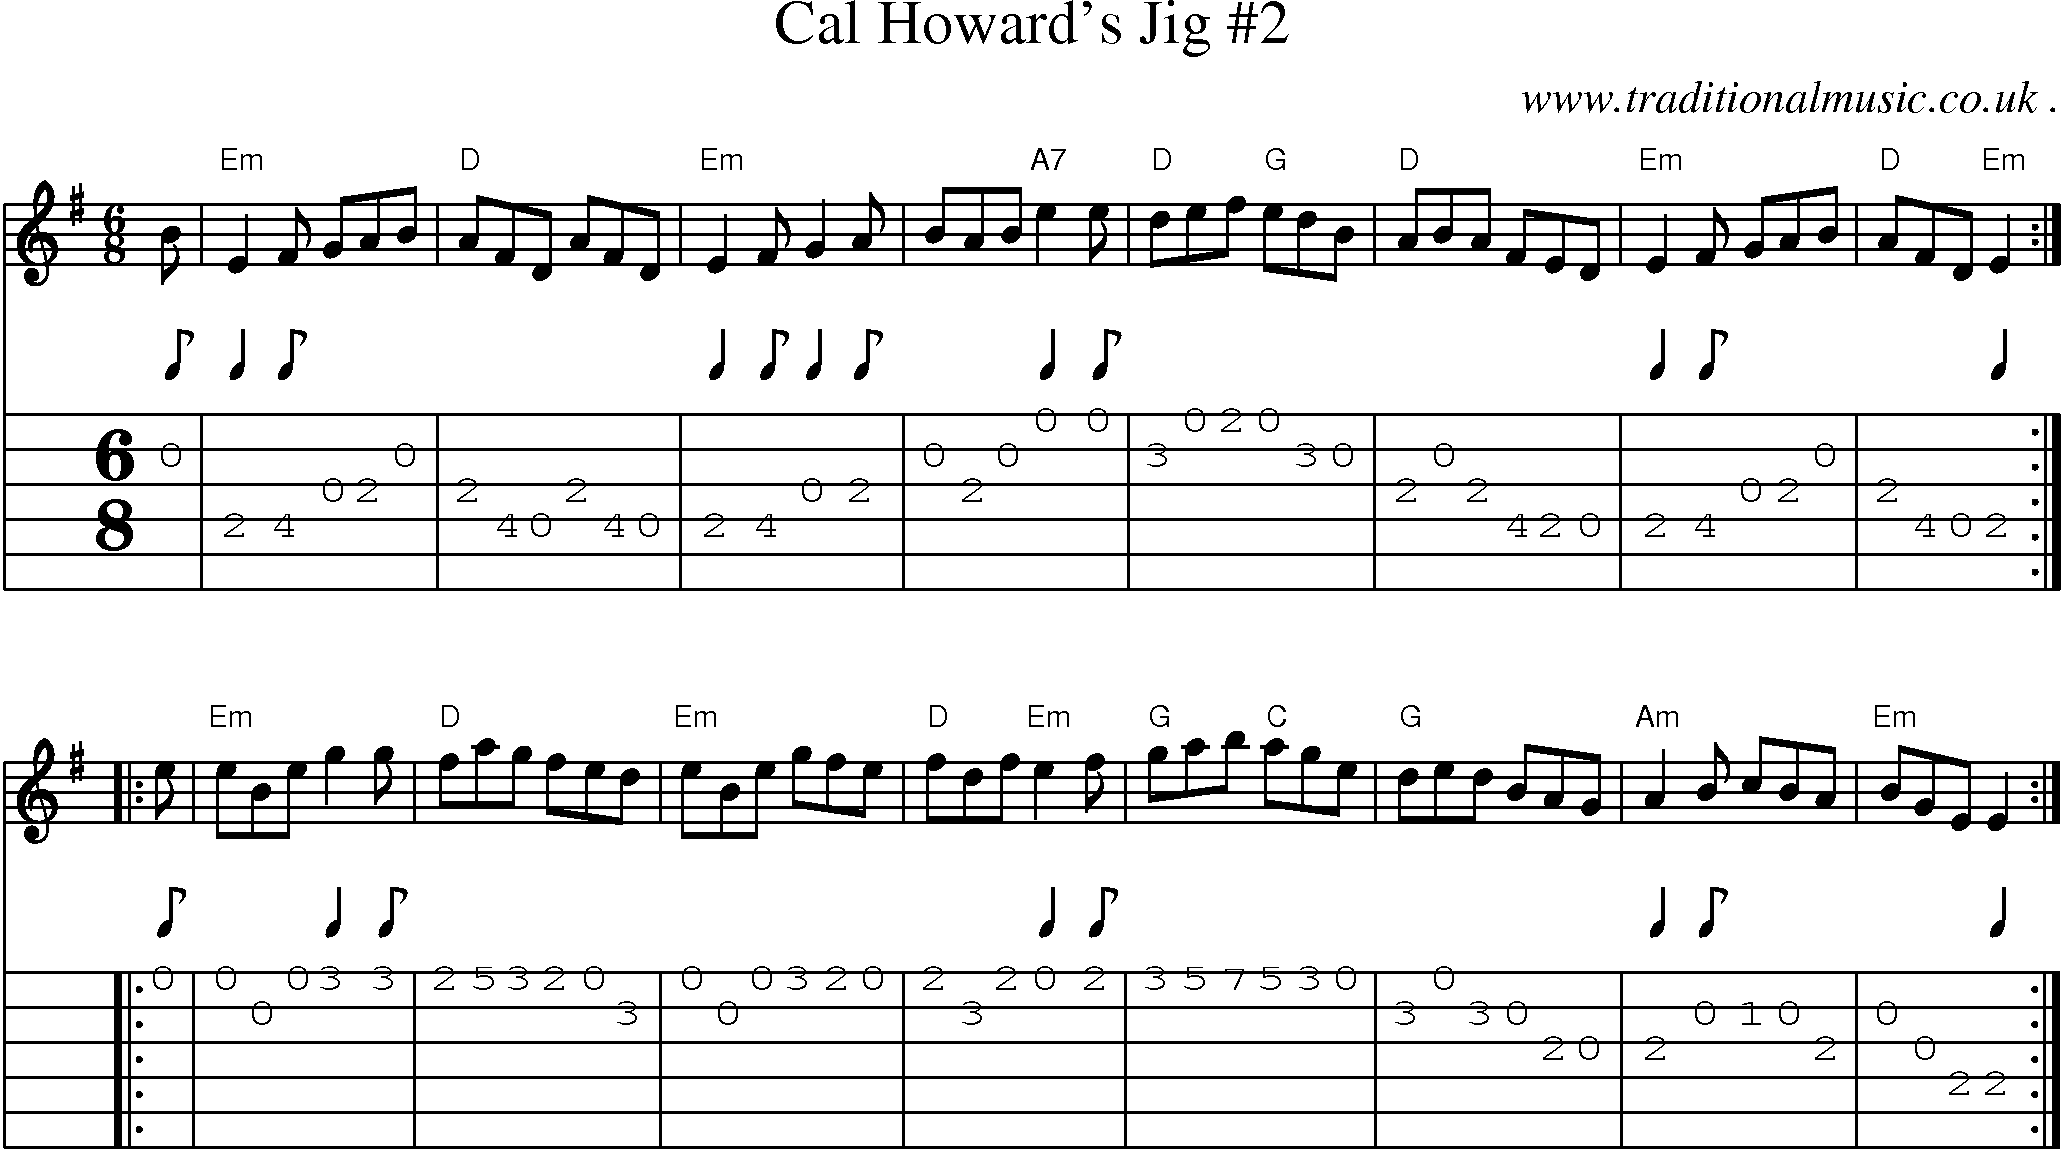 Sheet-music  score, Chords and Guitar Tabs for Cal Howards Jig 2